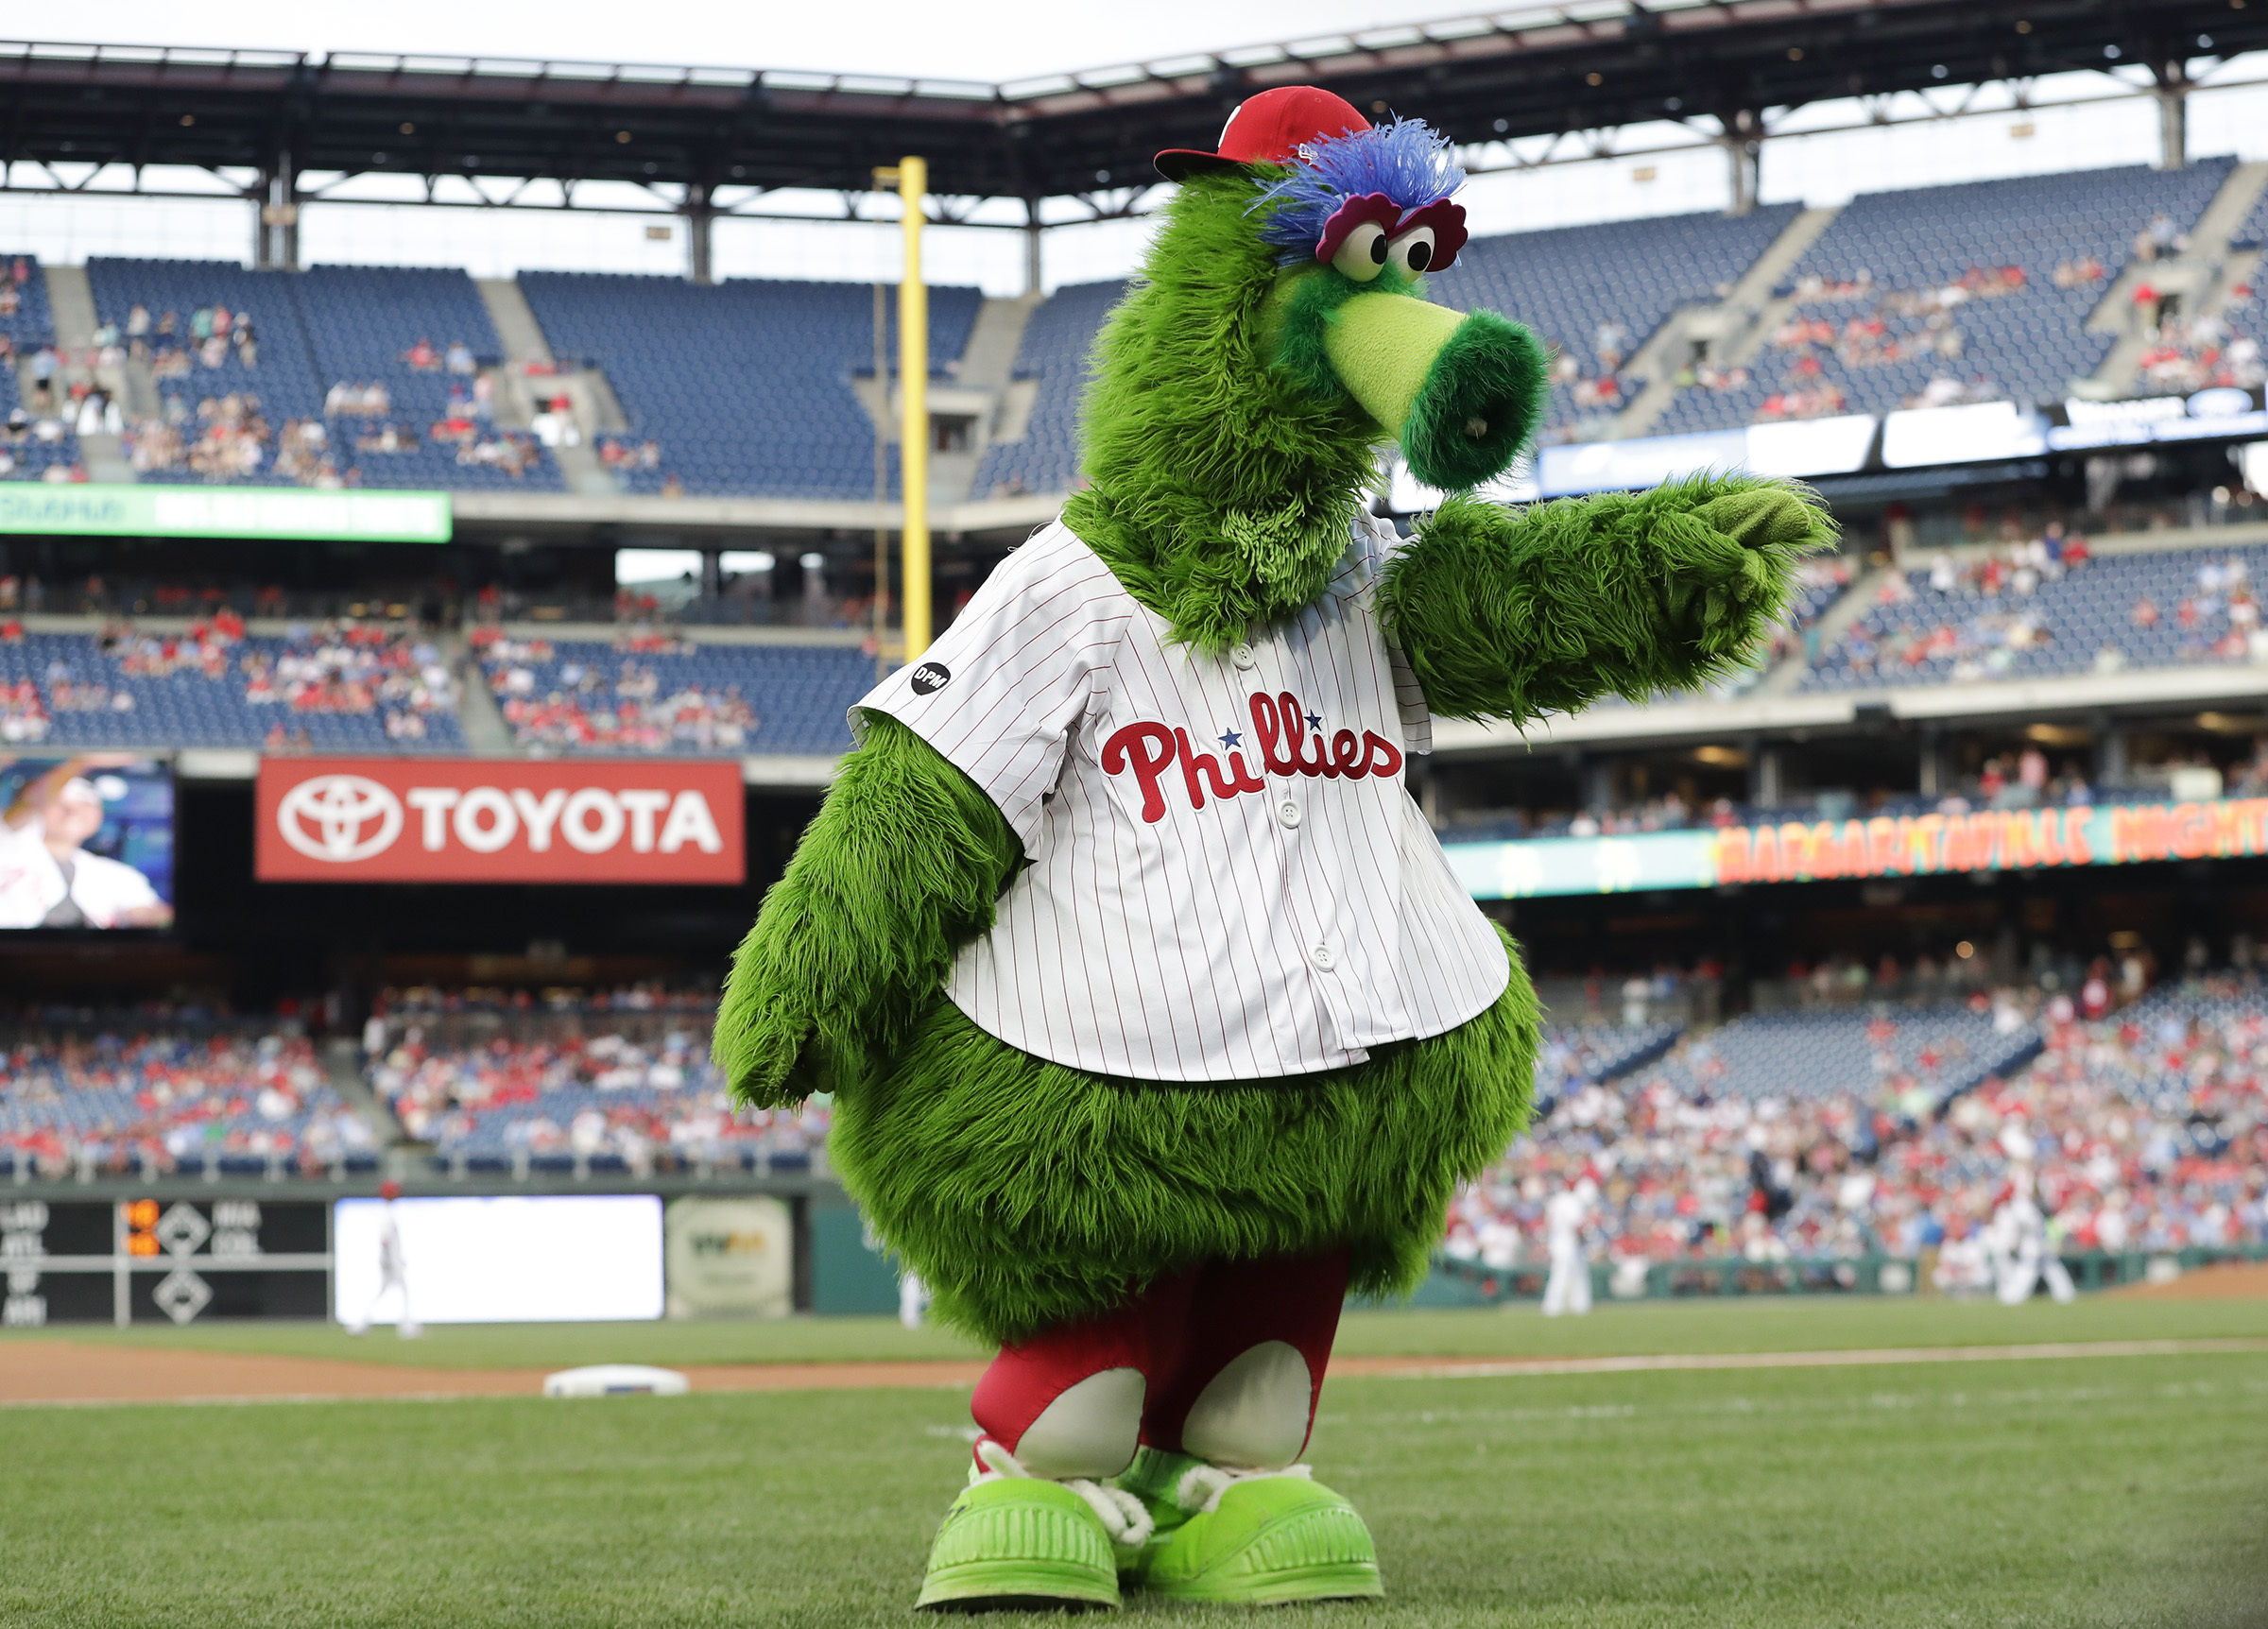 It's time to say thanks and farewell to the Phillie Phanatic